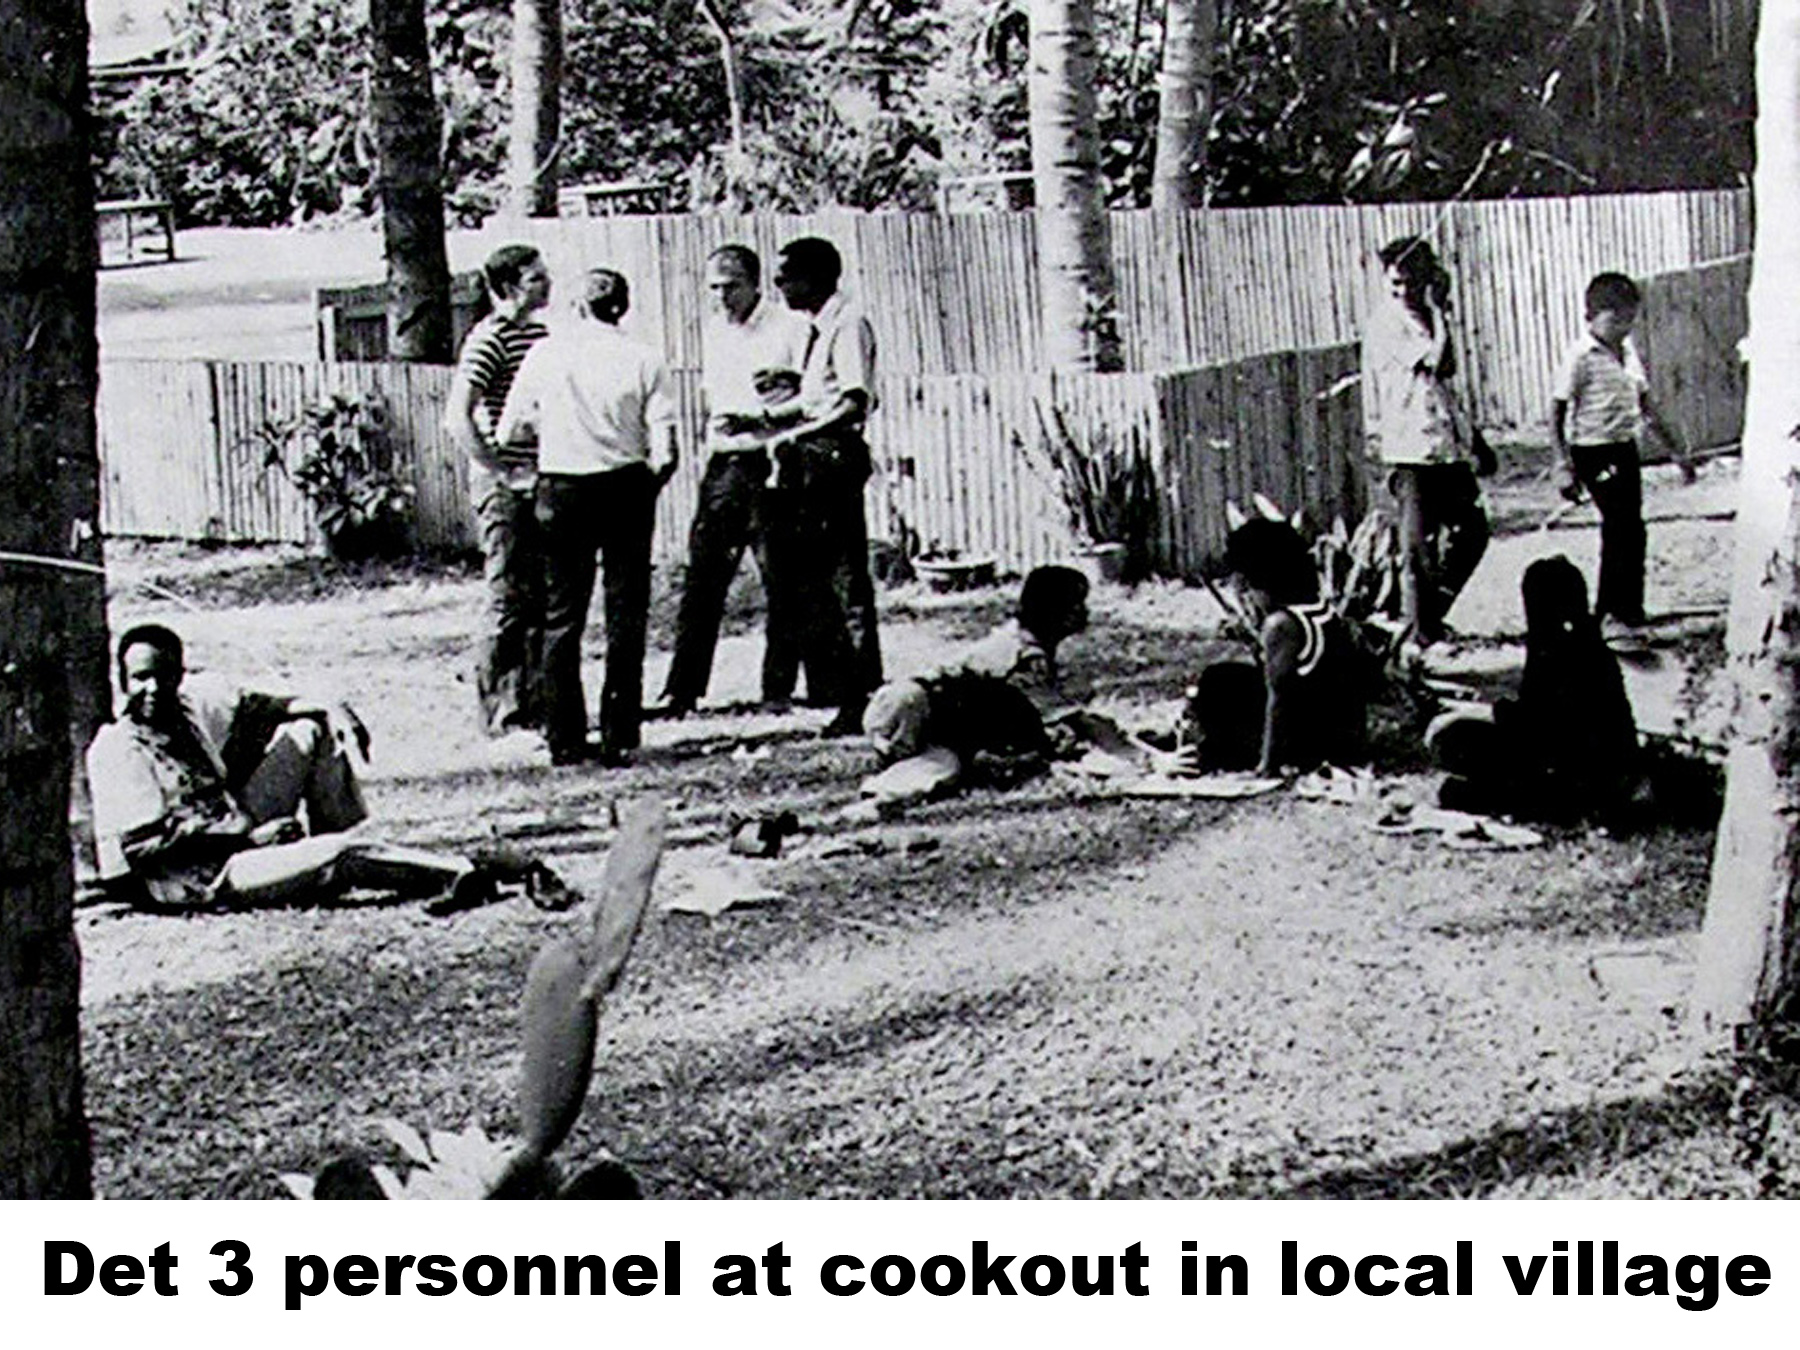 cookout